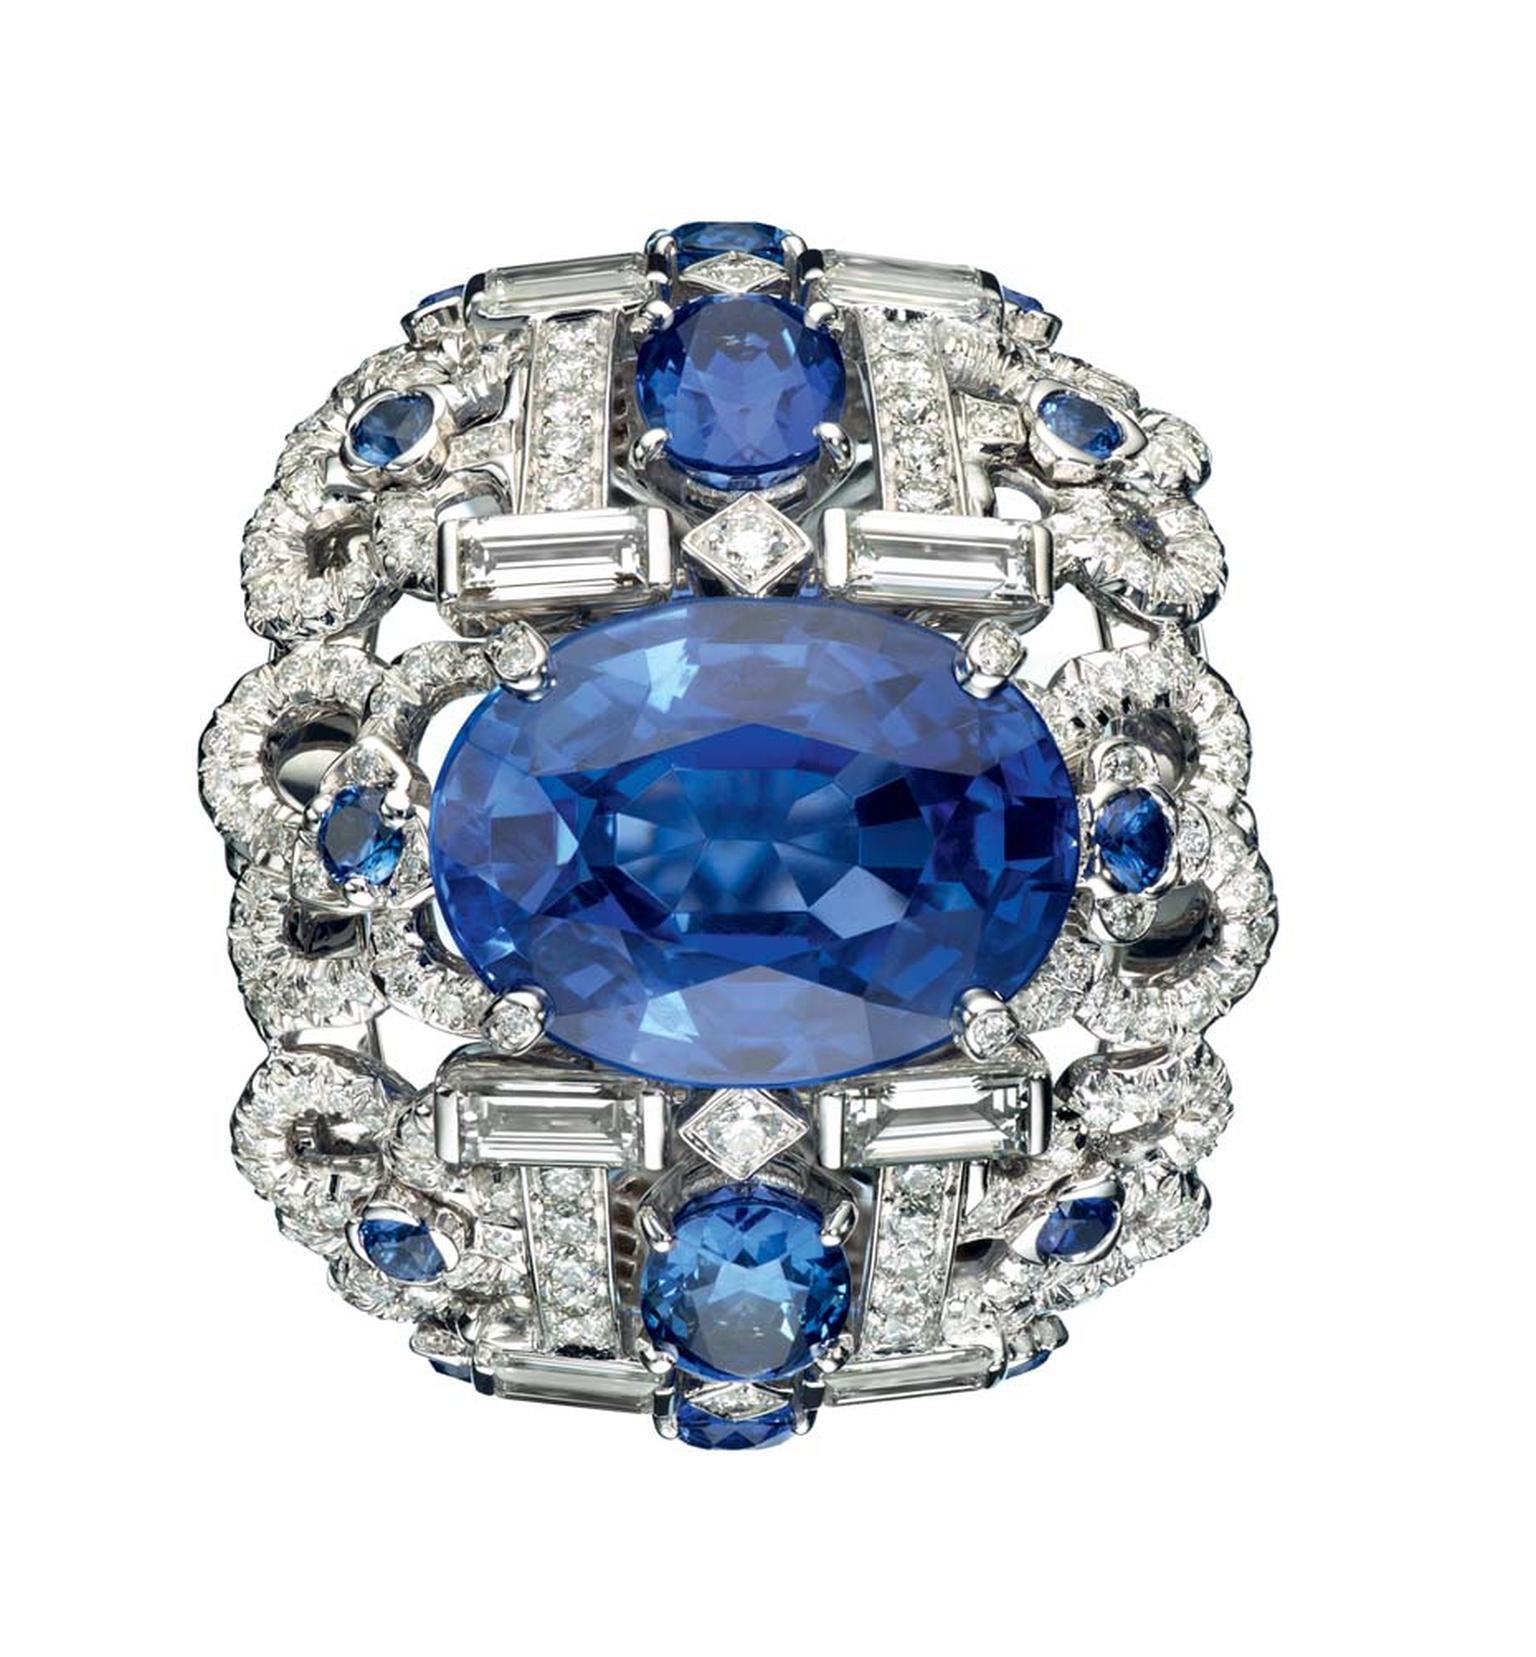 A 9.85ct oval-cut sapphire set in 18ct white gold, from Chaumet's Hortensia collection.